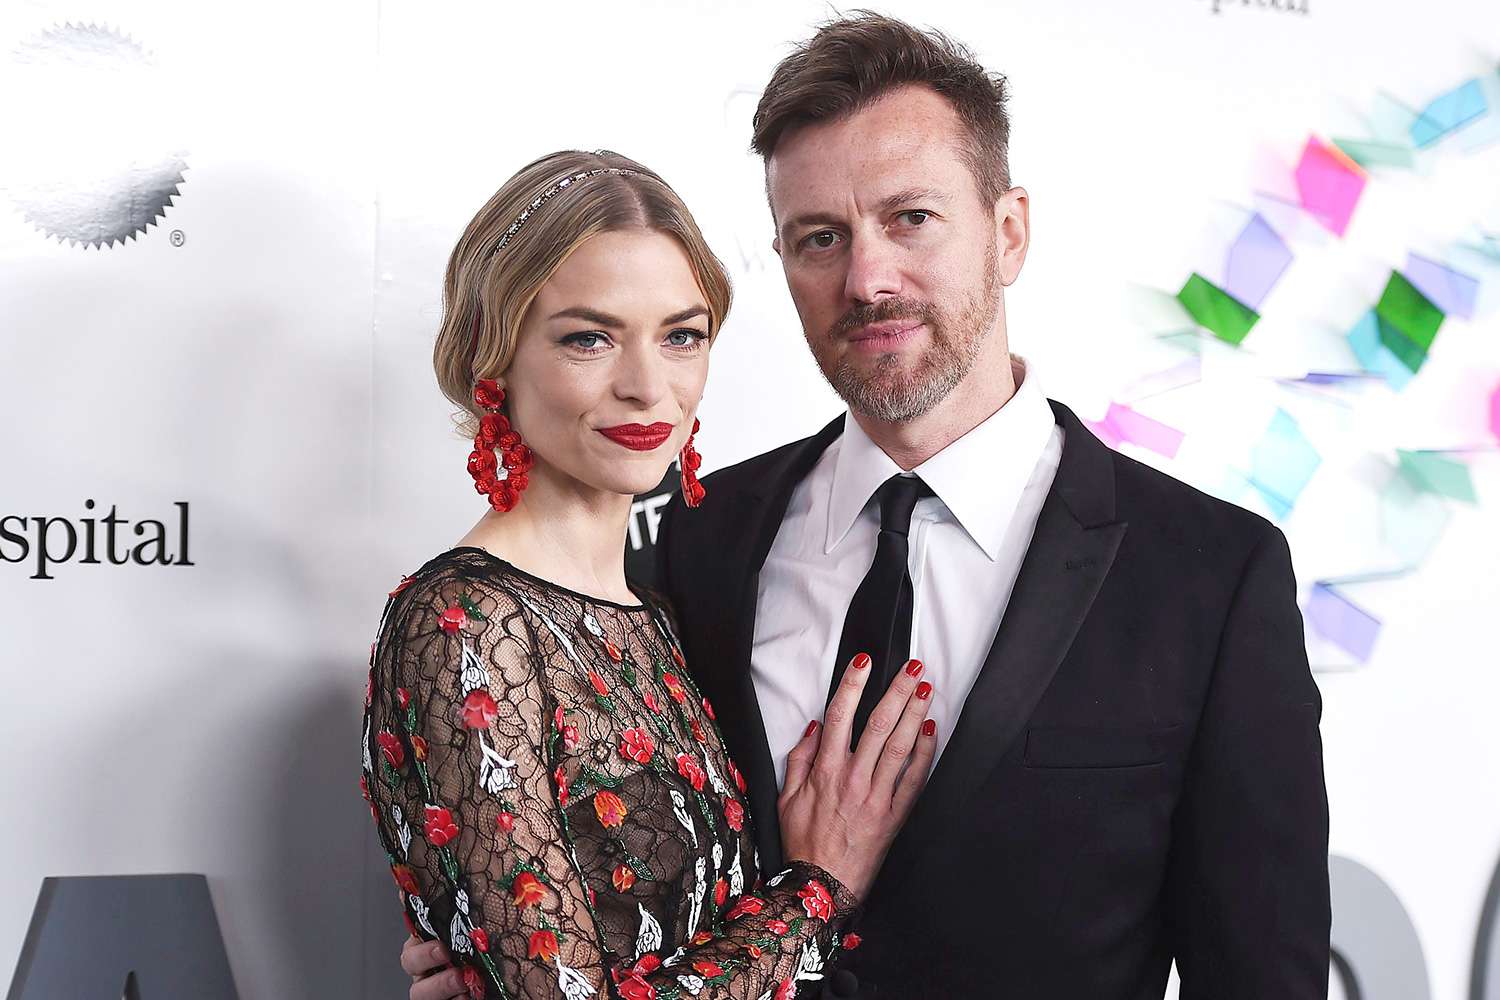 Jaime King and Kyle Newman arrive at the Kaleidoscope 5: LIGHT event on in Culver City, Calif Kaleidoscope 5: LIGHT, Culver City, USA - 5 May 2017